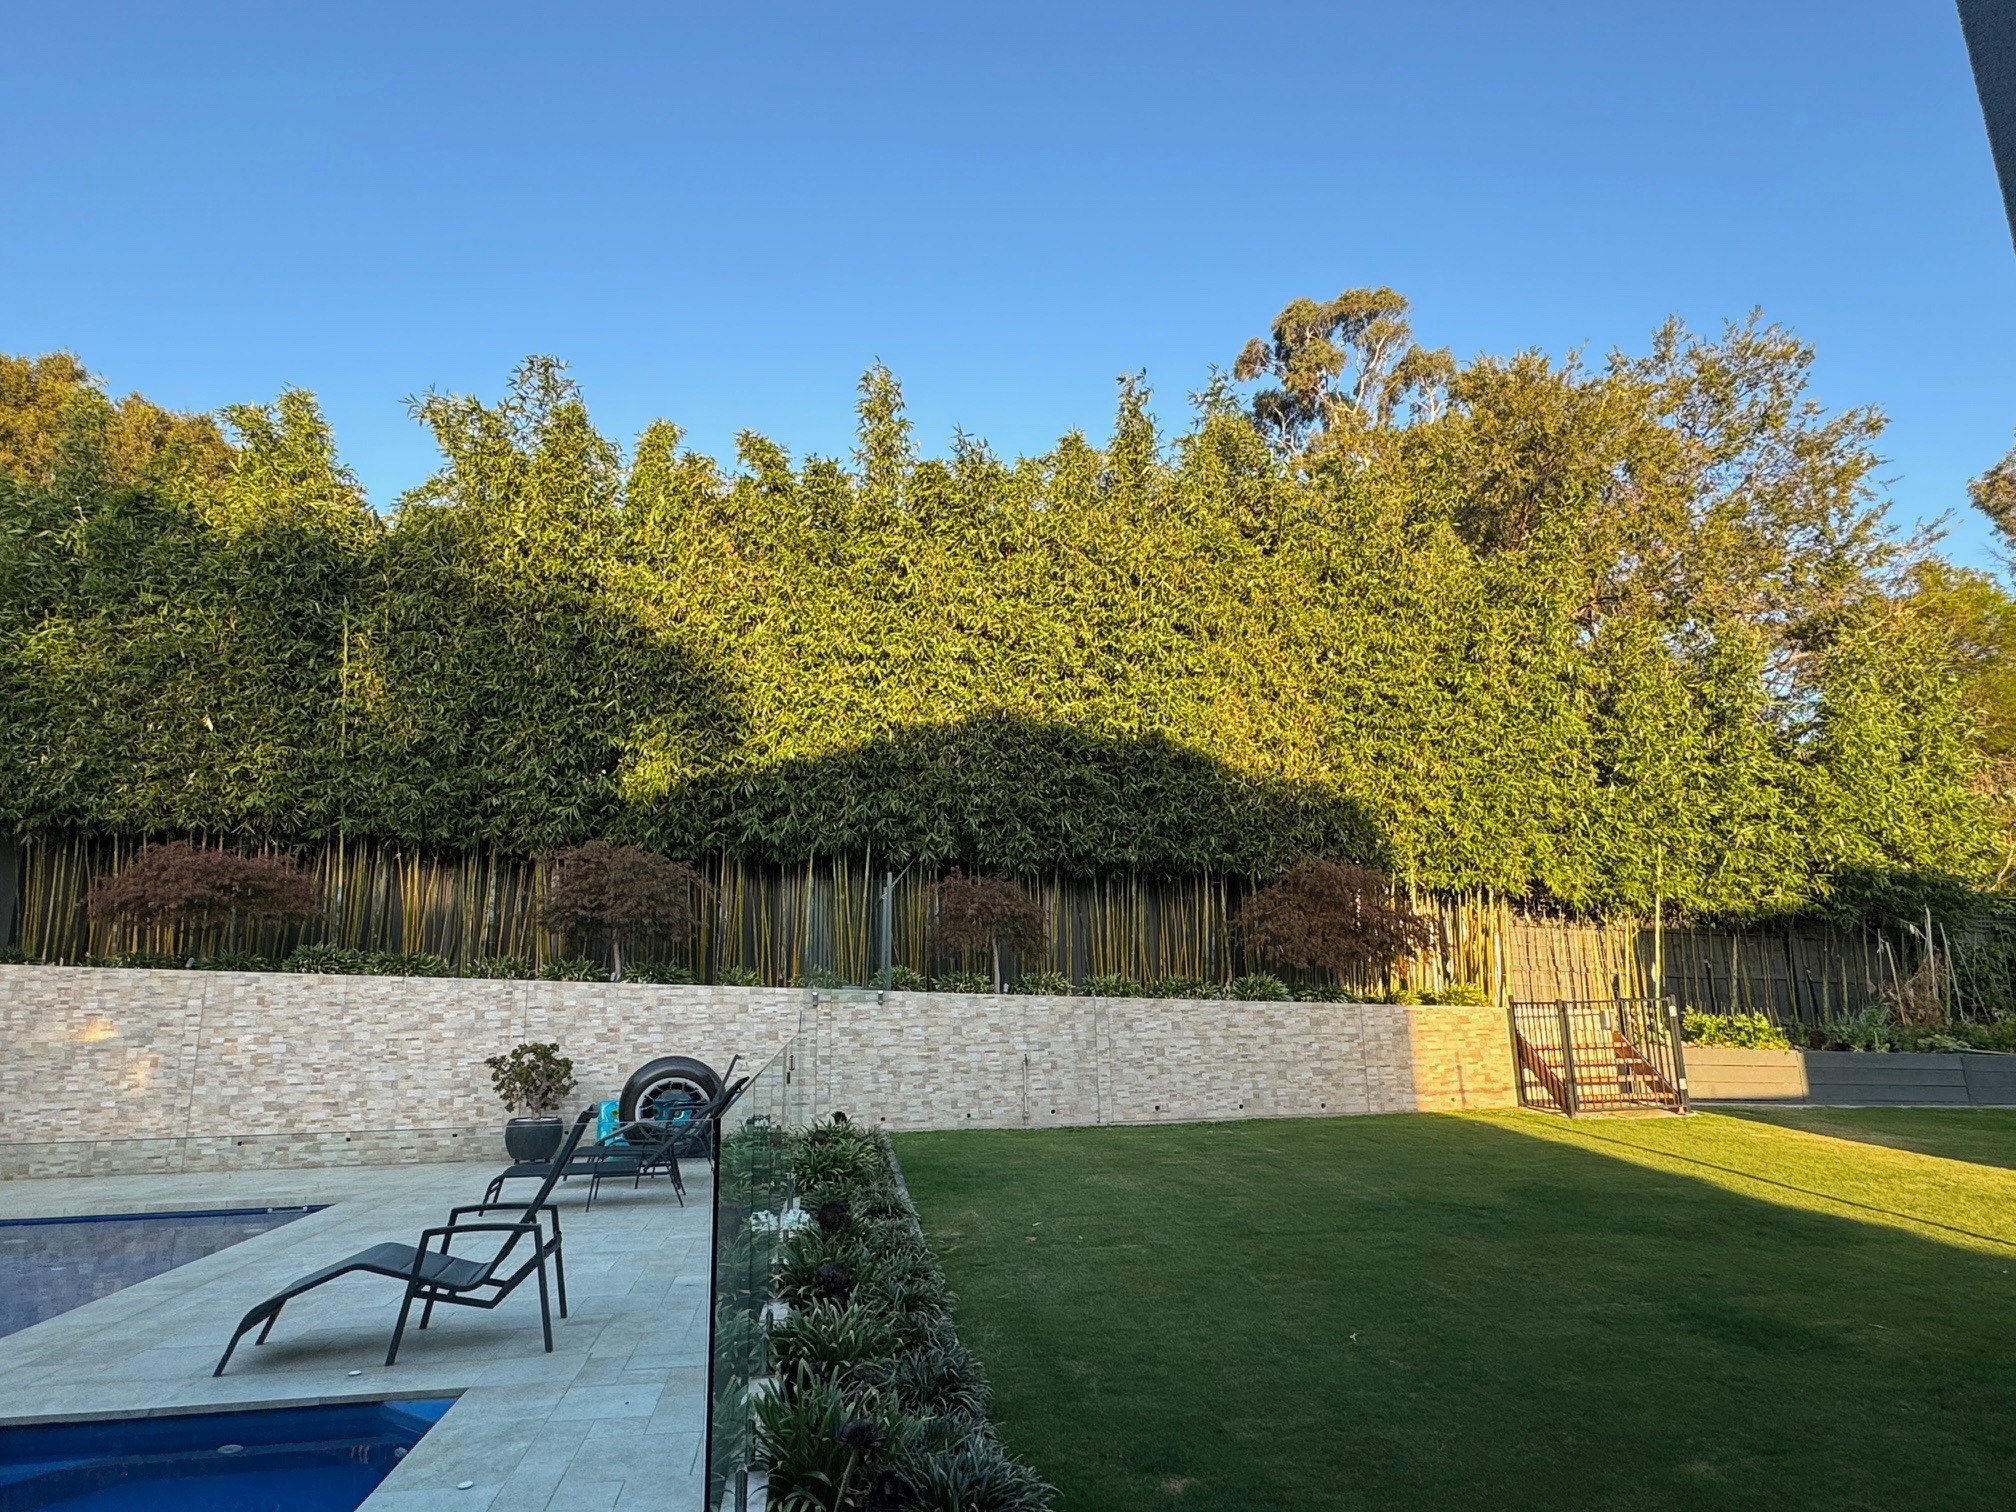 Check out these stunning photos of Oldhamii Bamboo thriving by a backyard pool! 🌿🌱 As time passes, you can see how tall and lush it grows, not only creating a beautiful green landscape but also offering effective privacy screening. 🌿💚 #backyardoasis #bamboobeauty #bamboo #melbourne #gardening #LandscapeDesign